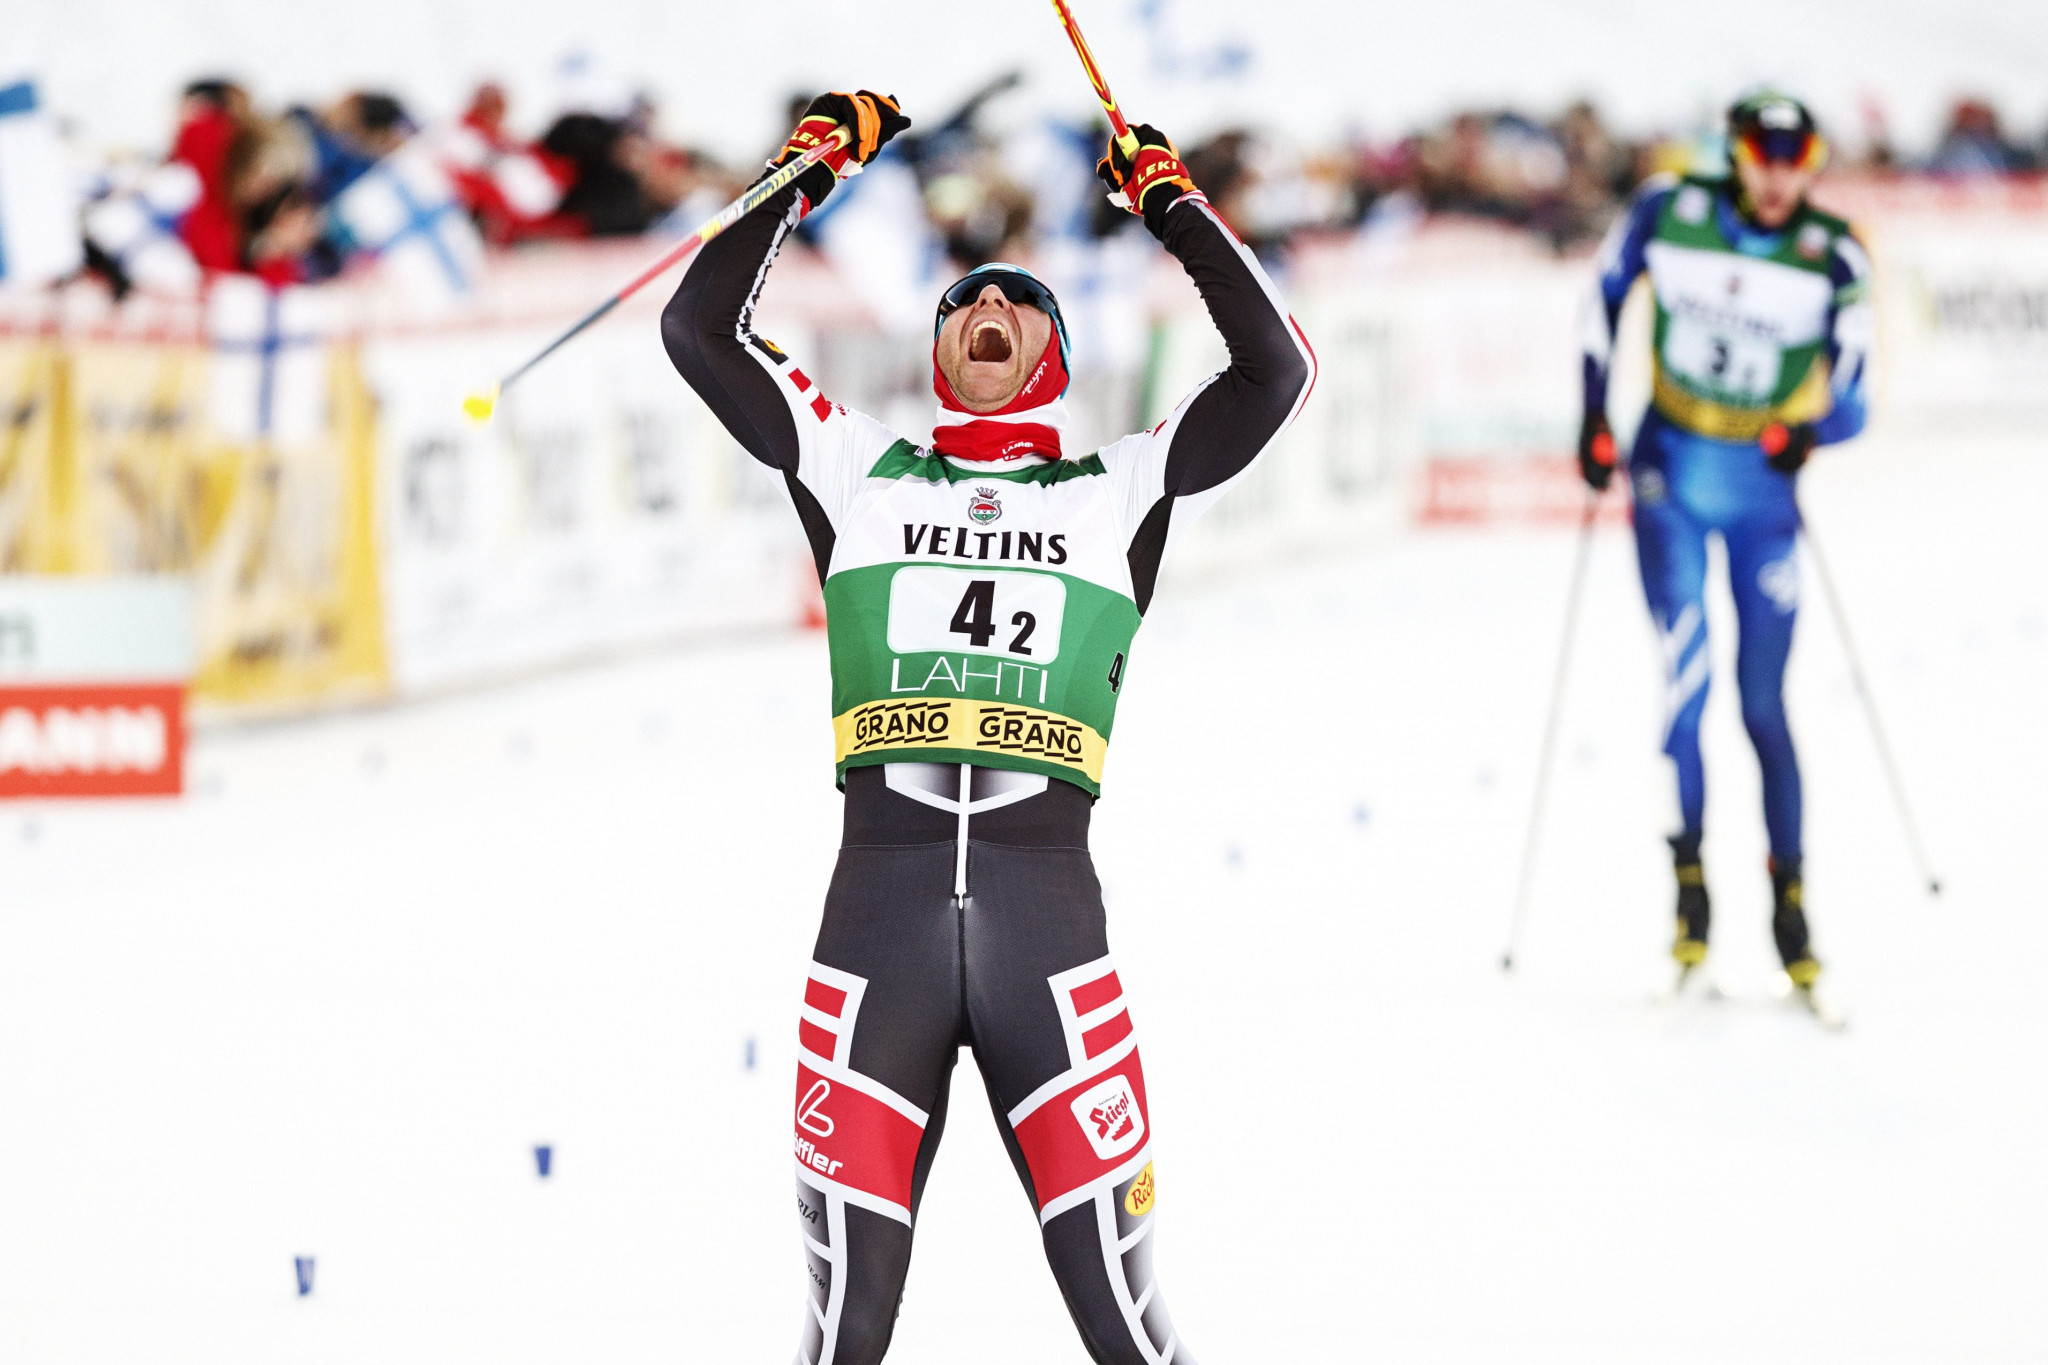 Austria claimed victory in the men's team sprint at the Nordic Combined World Cup ©Getty Images